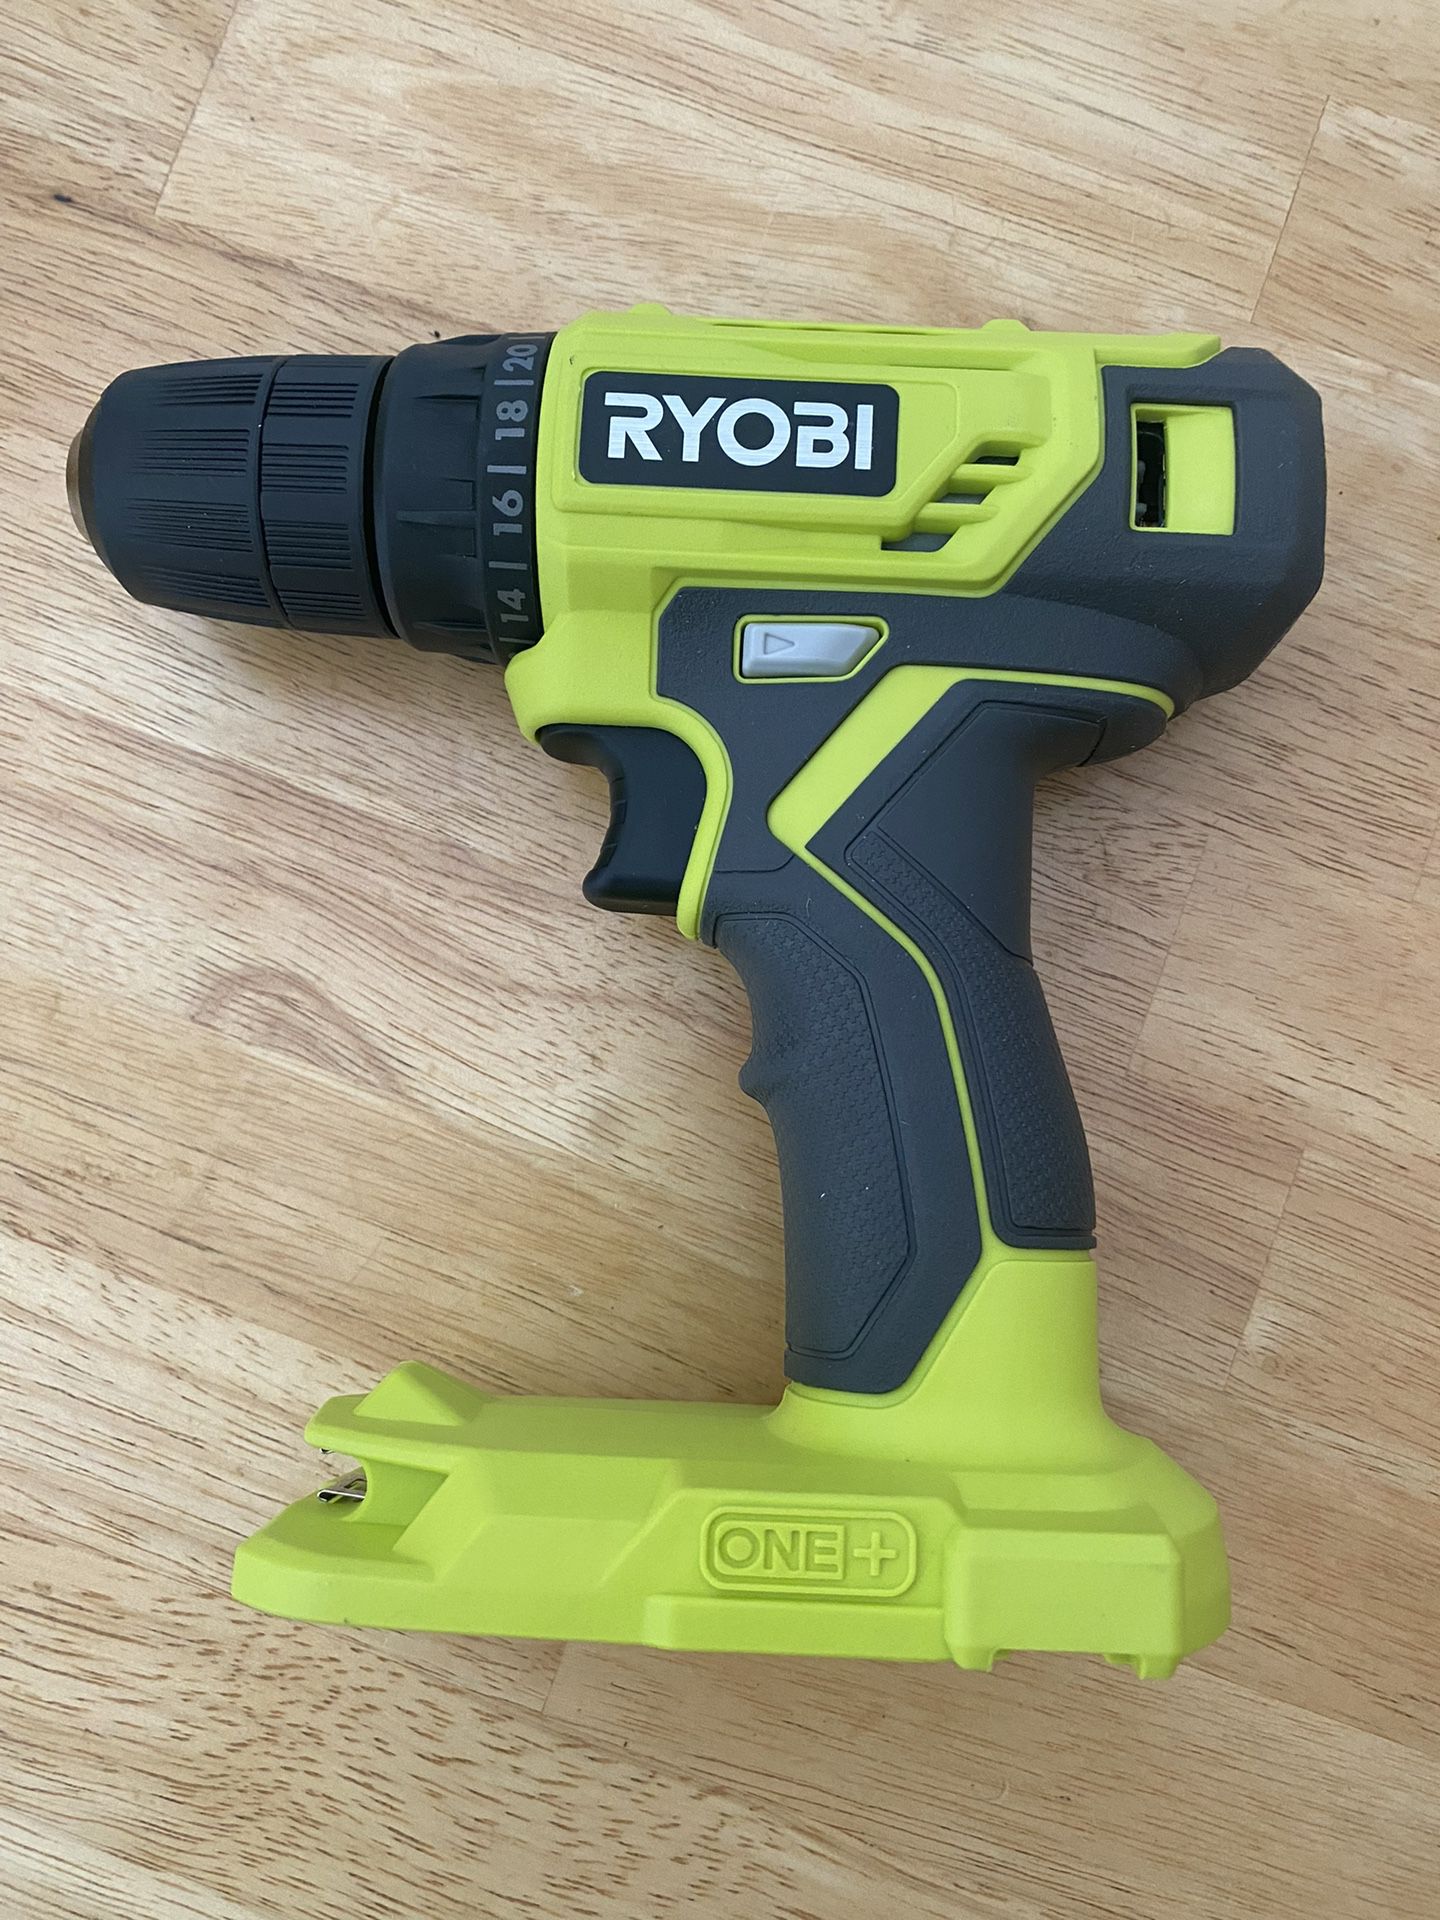 Ryobi Drill (tool Only) Battery Not Included